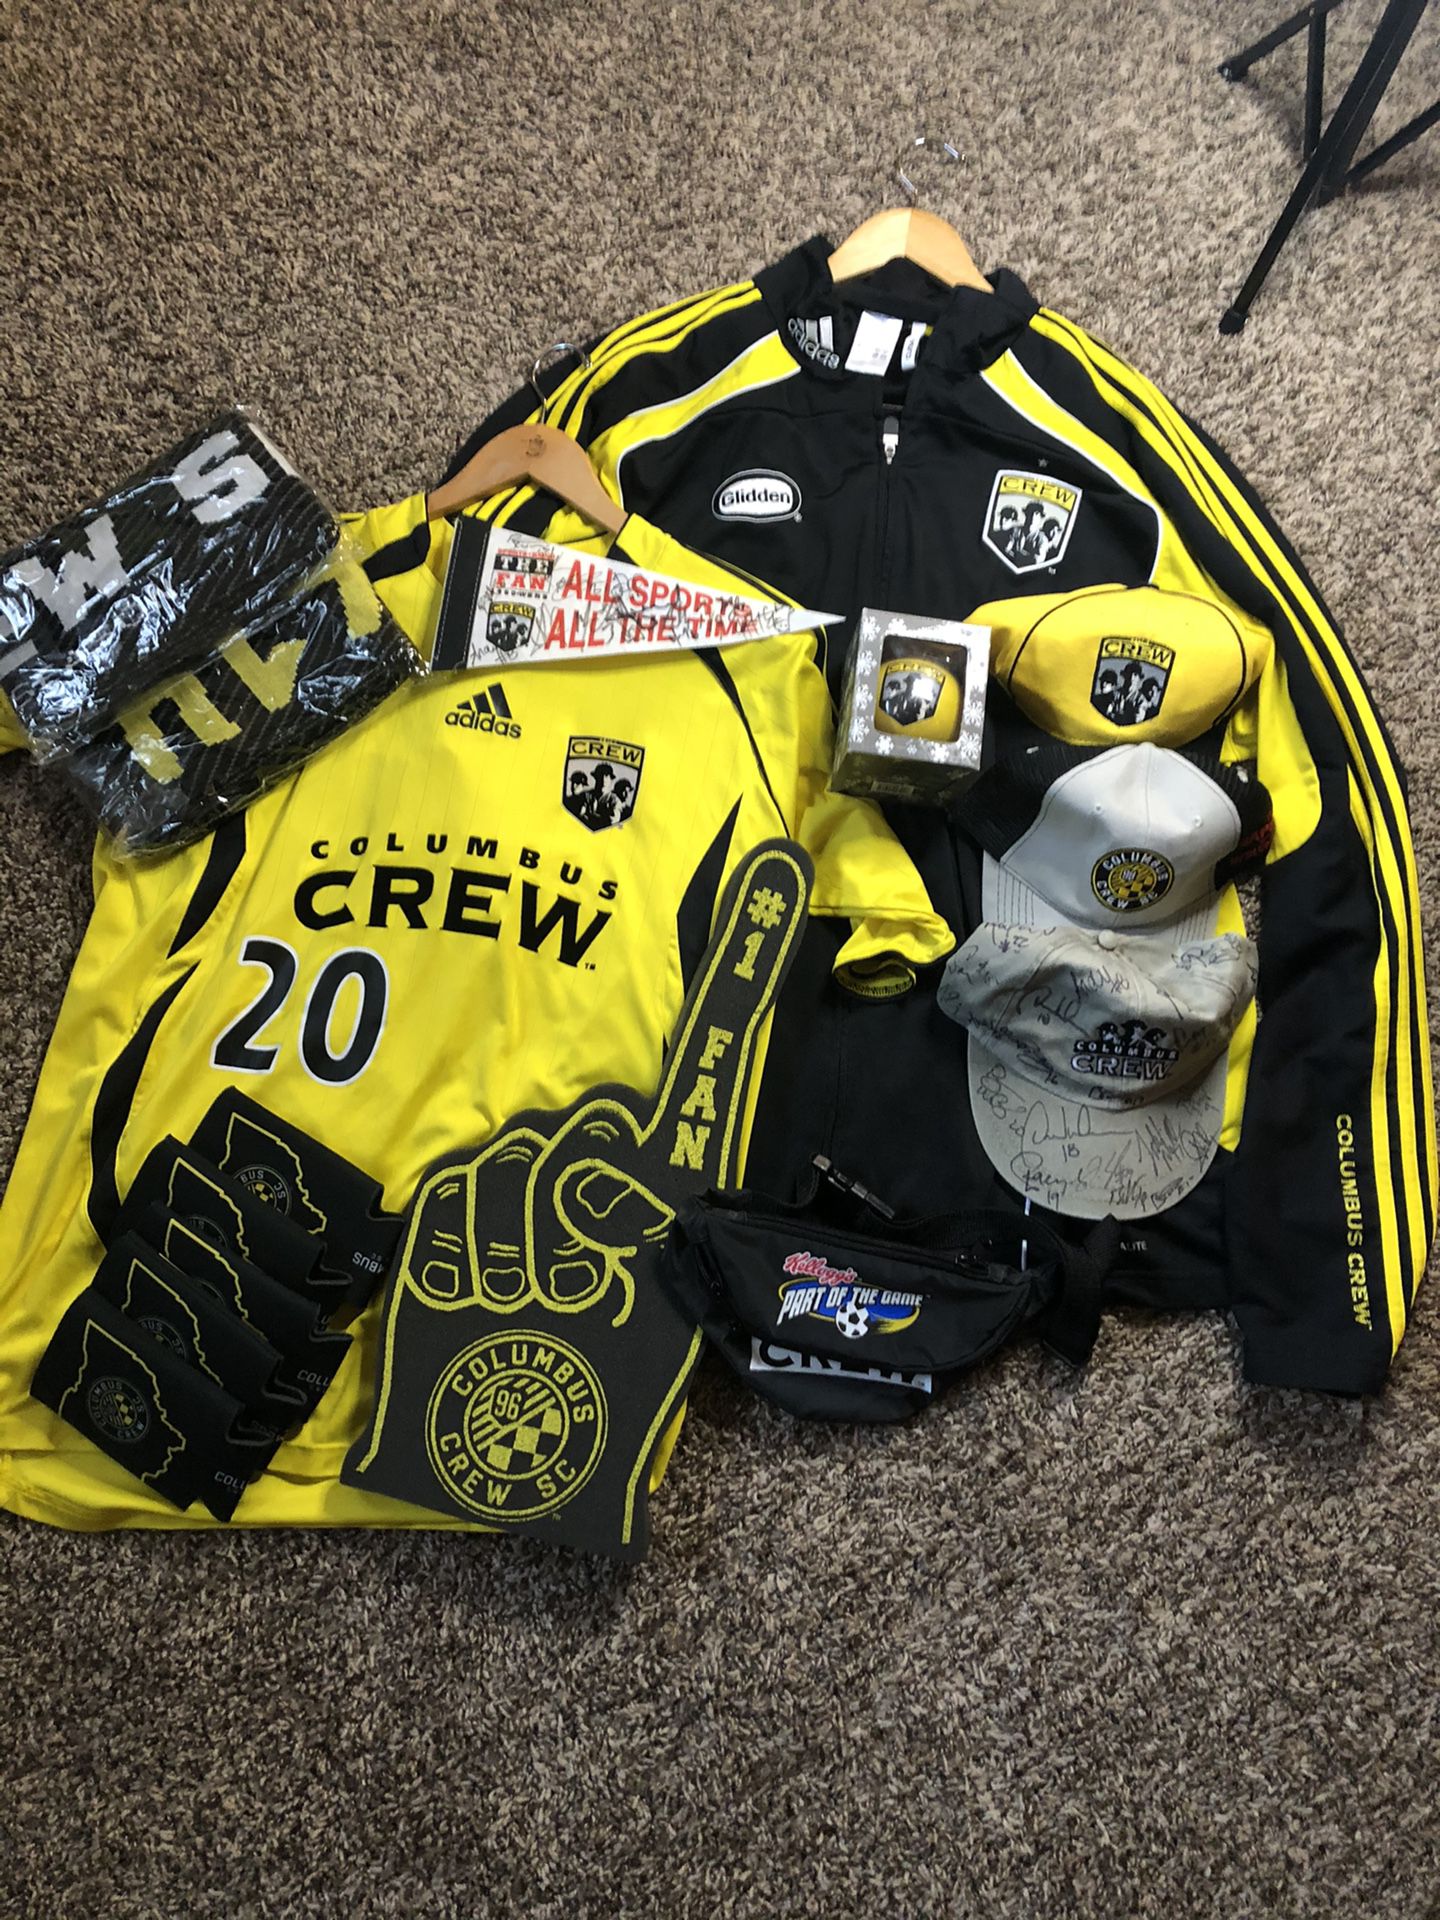 Columbus Crew Christmas Package - Signed memorabilia, Authentic Gear, and multiple other items!